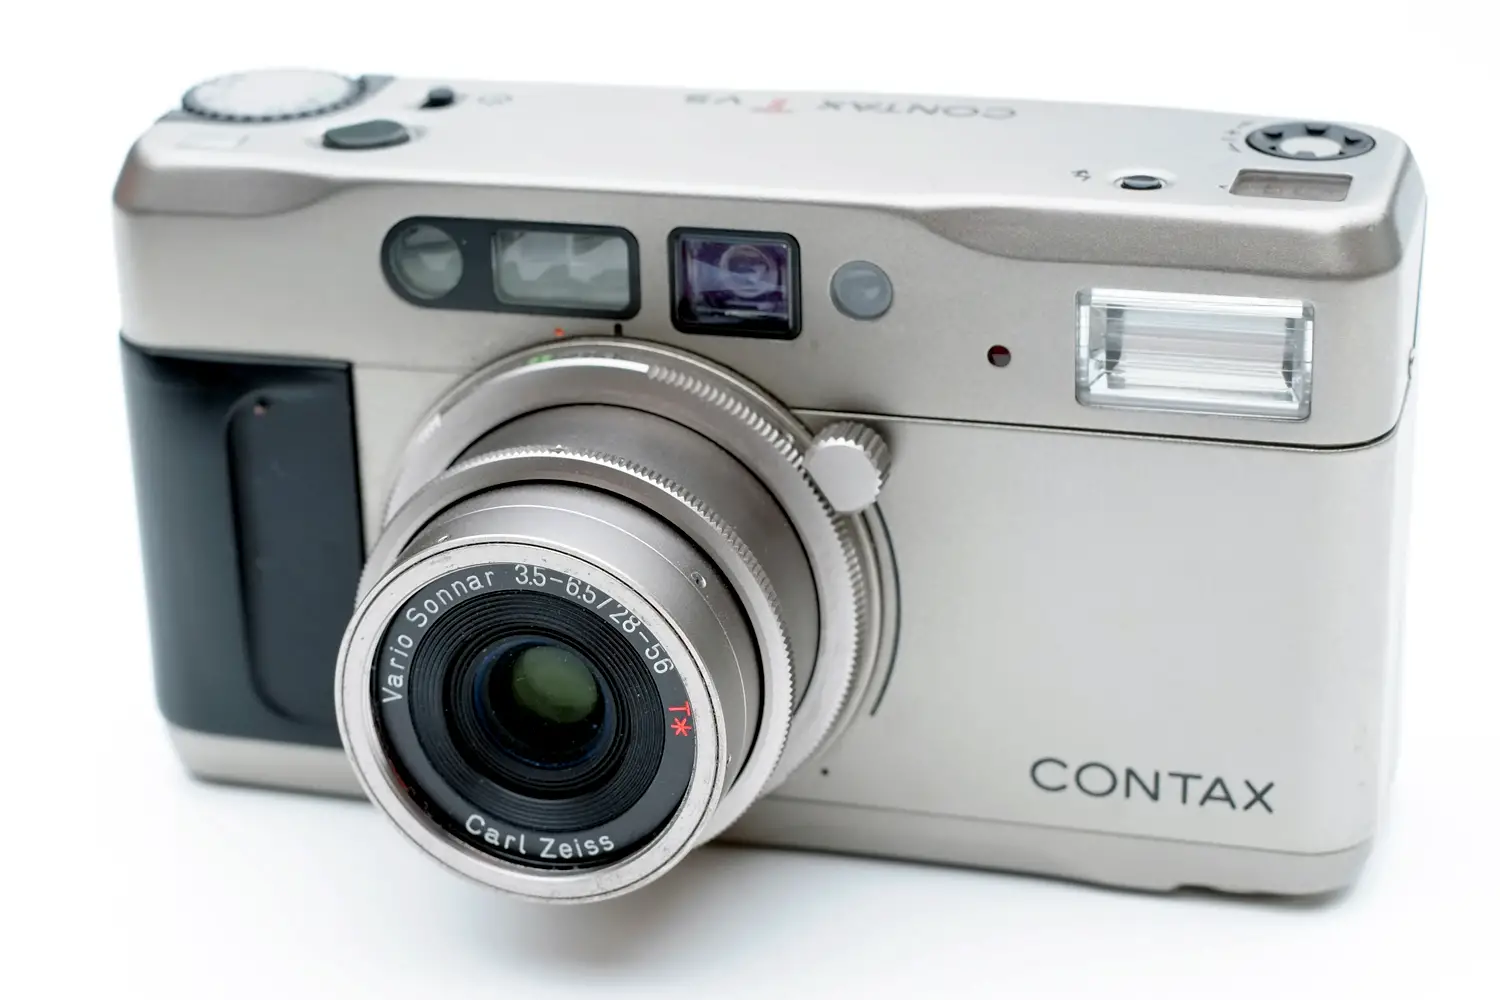 The Contax TVS. The 'executive' compact zoom - Guest post by Eddy